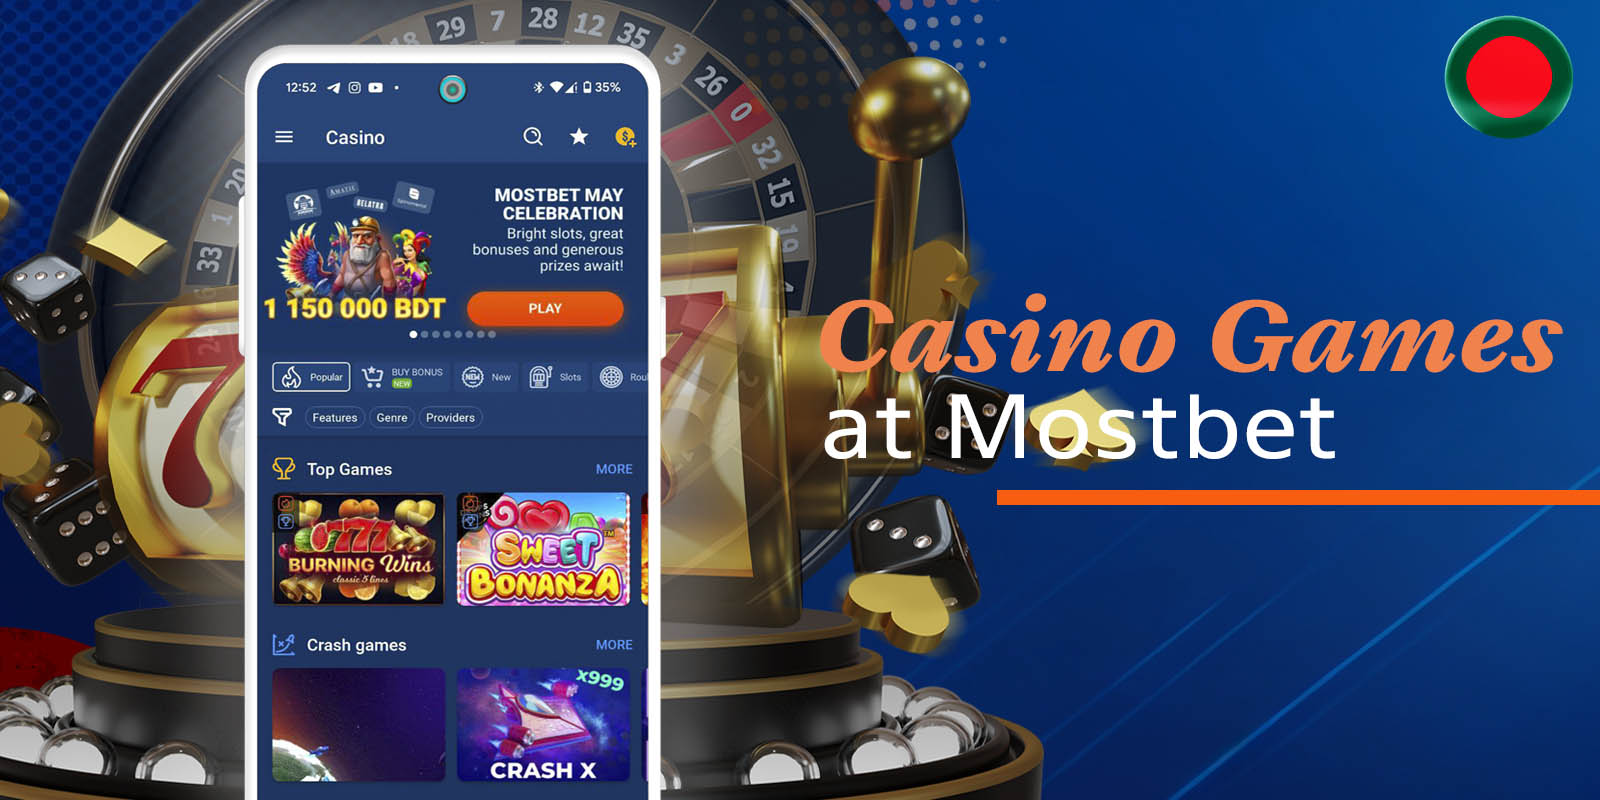 Casino Games at Mostbet